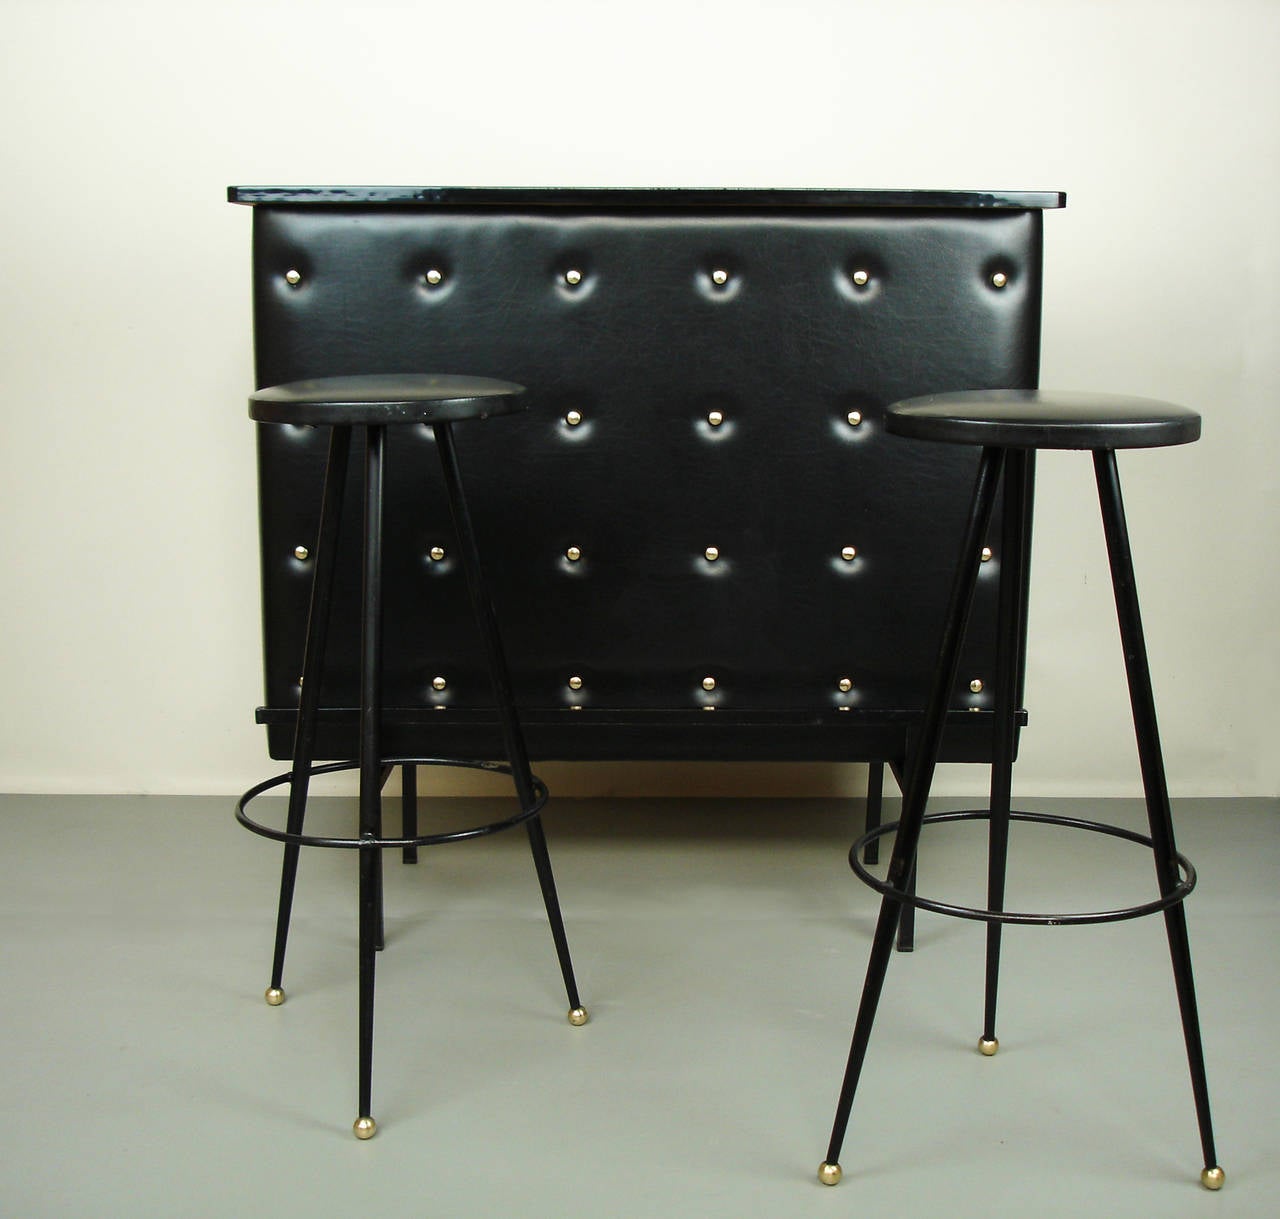 A bar with a in black laminated top and an enamelled metal support, upholstered with tufted vinyl and bronze buttons.
Two stools with black enamelled metal feet and vinyl seats. Height: 30.25 in.